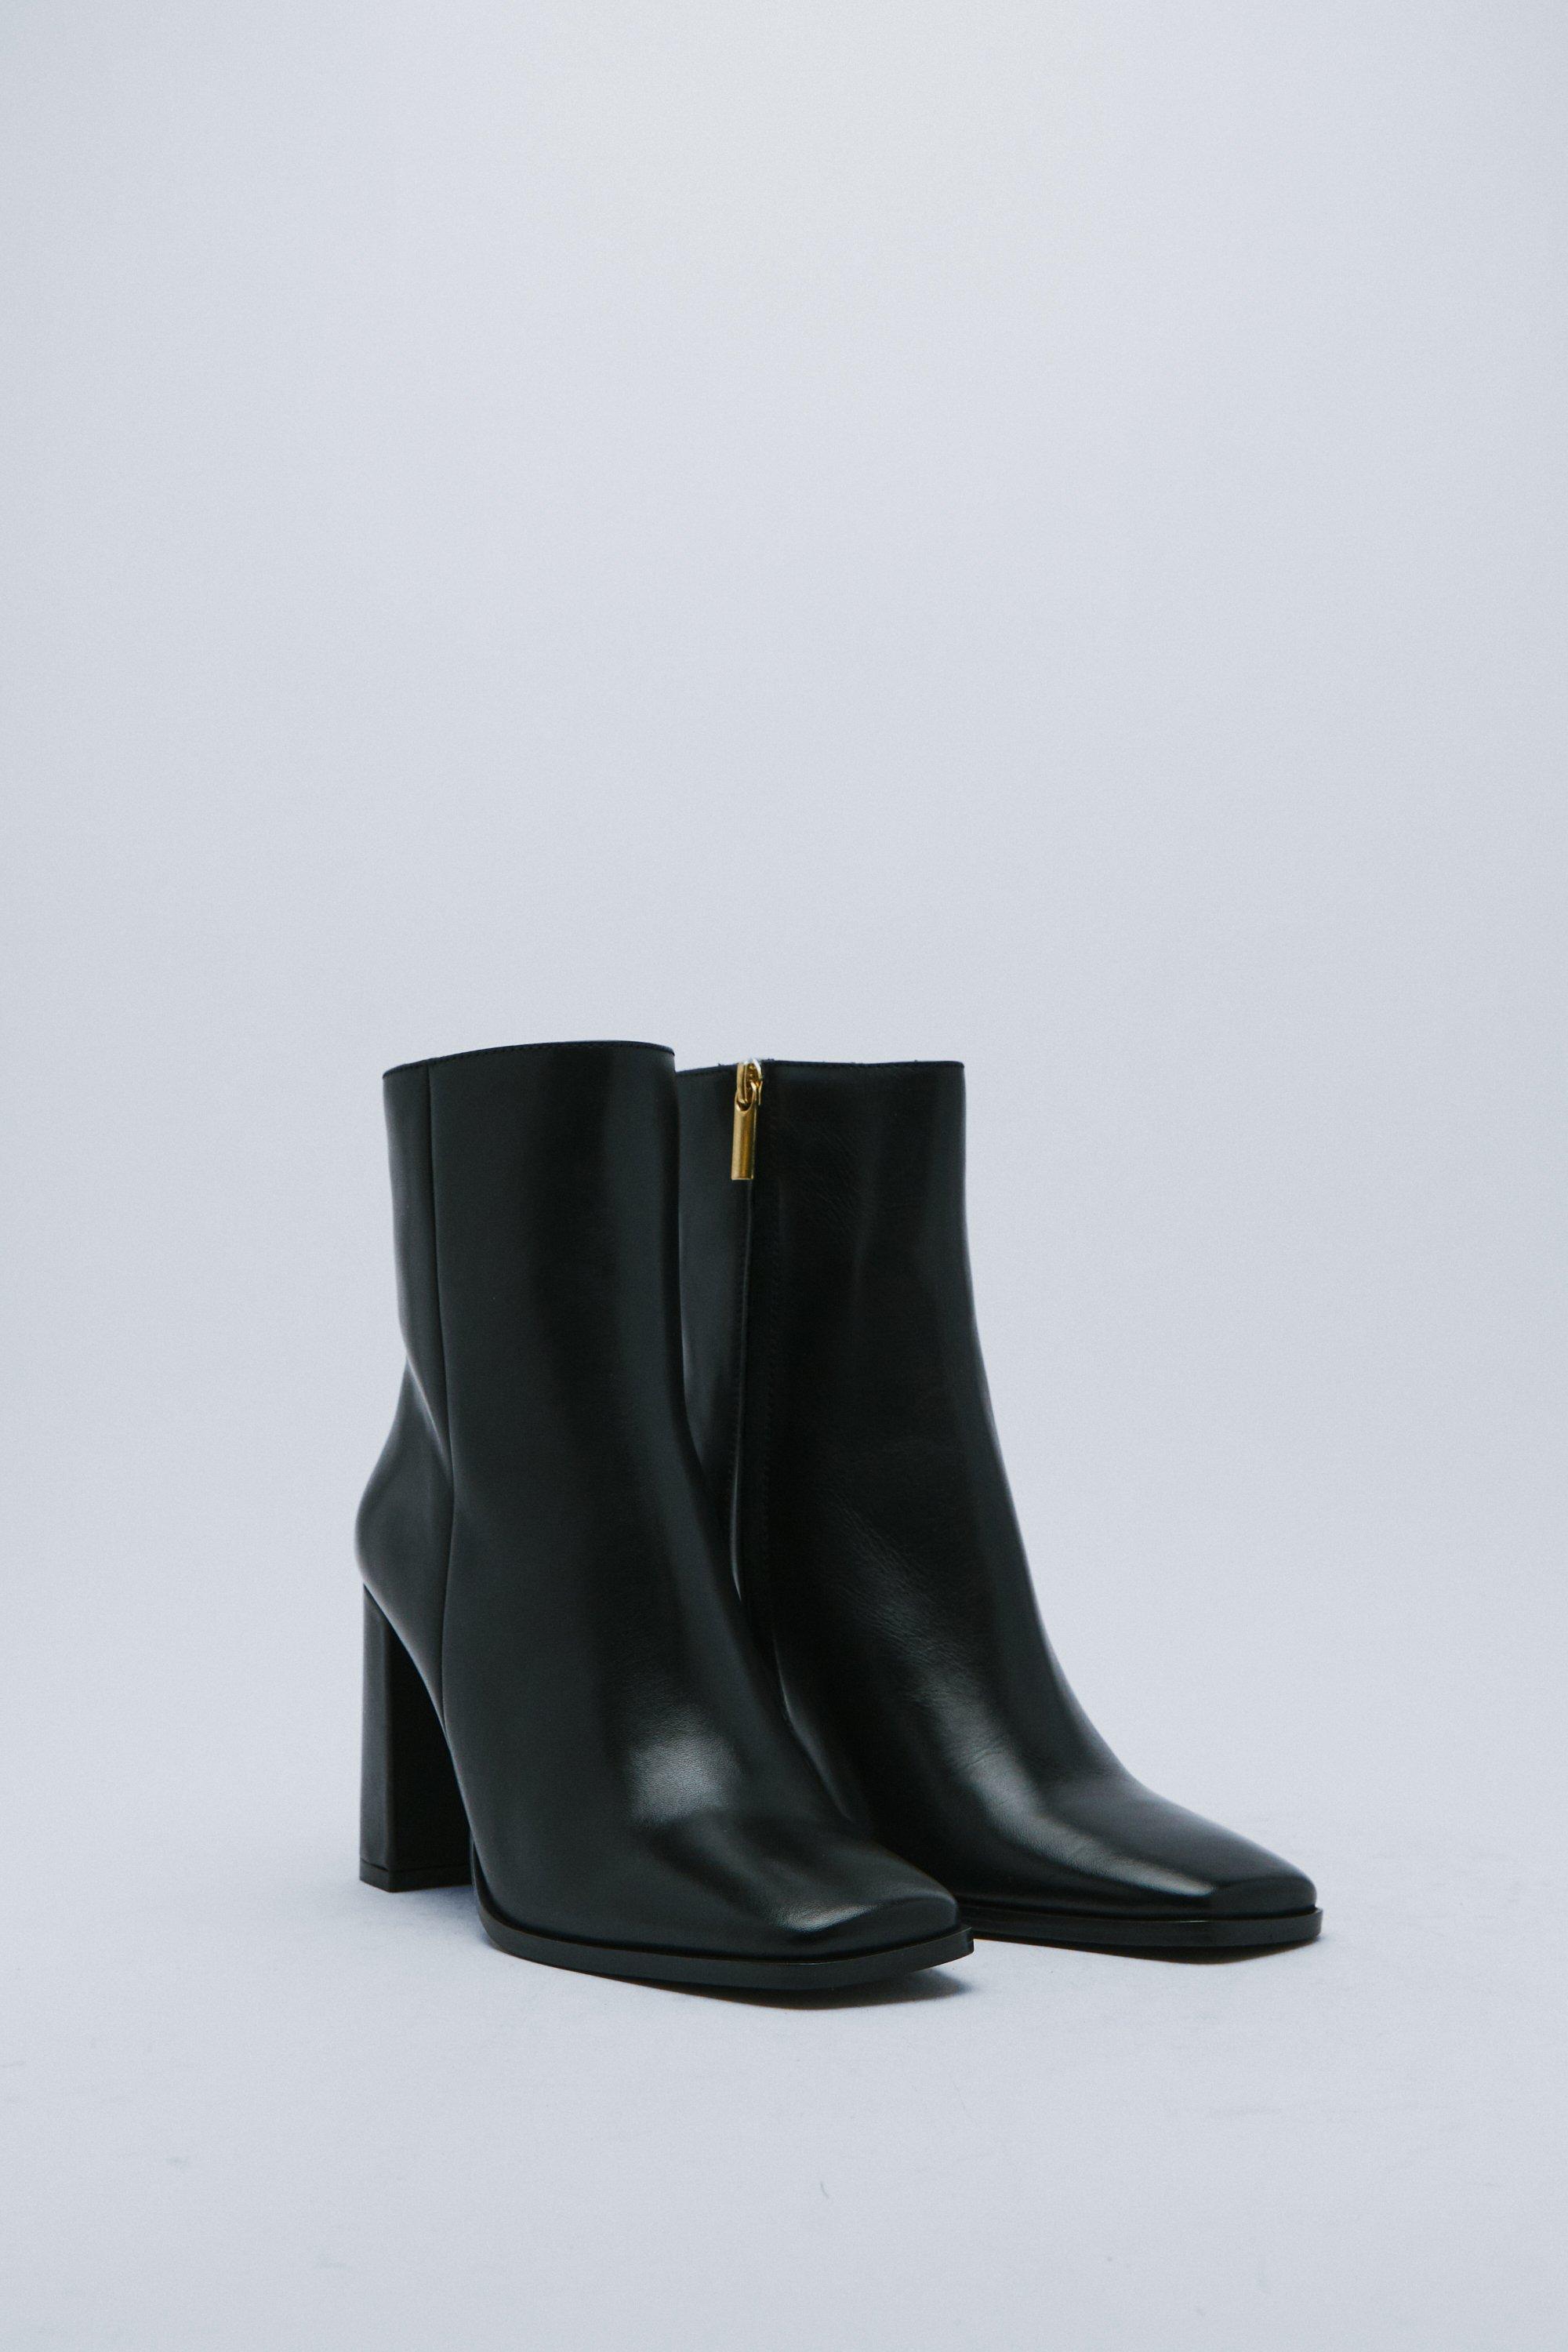 Black ankle boots with rectangular heel and square toe with gold detail